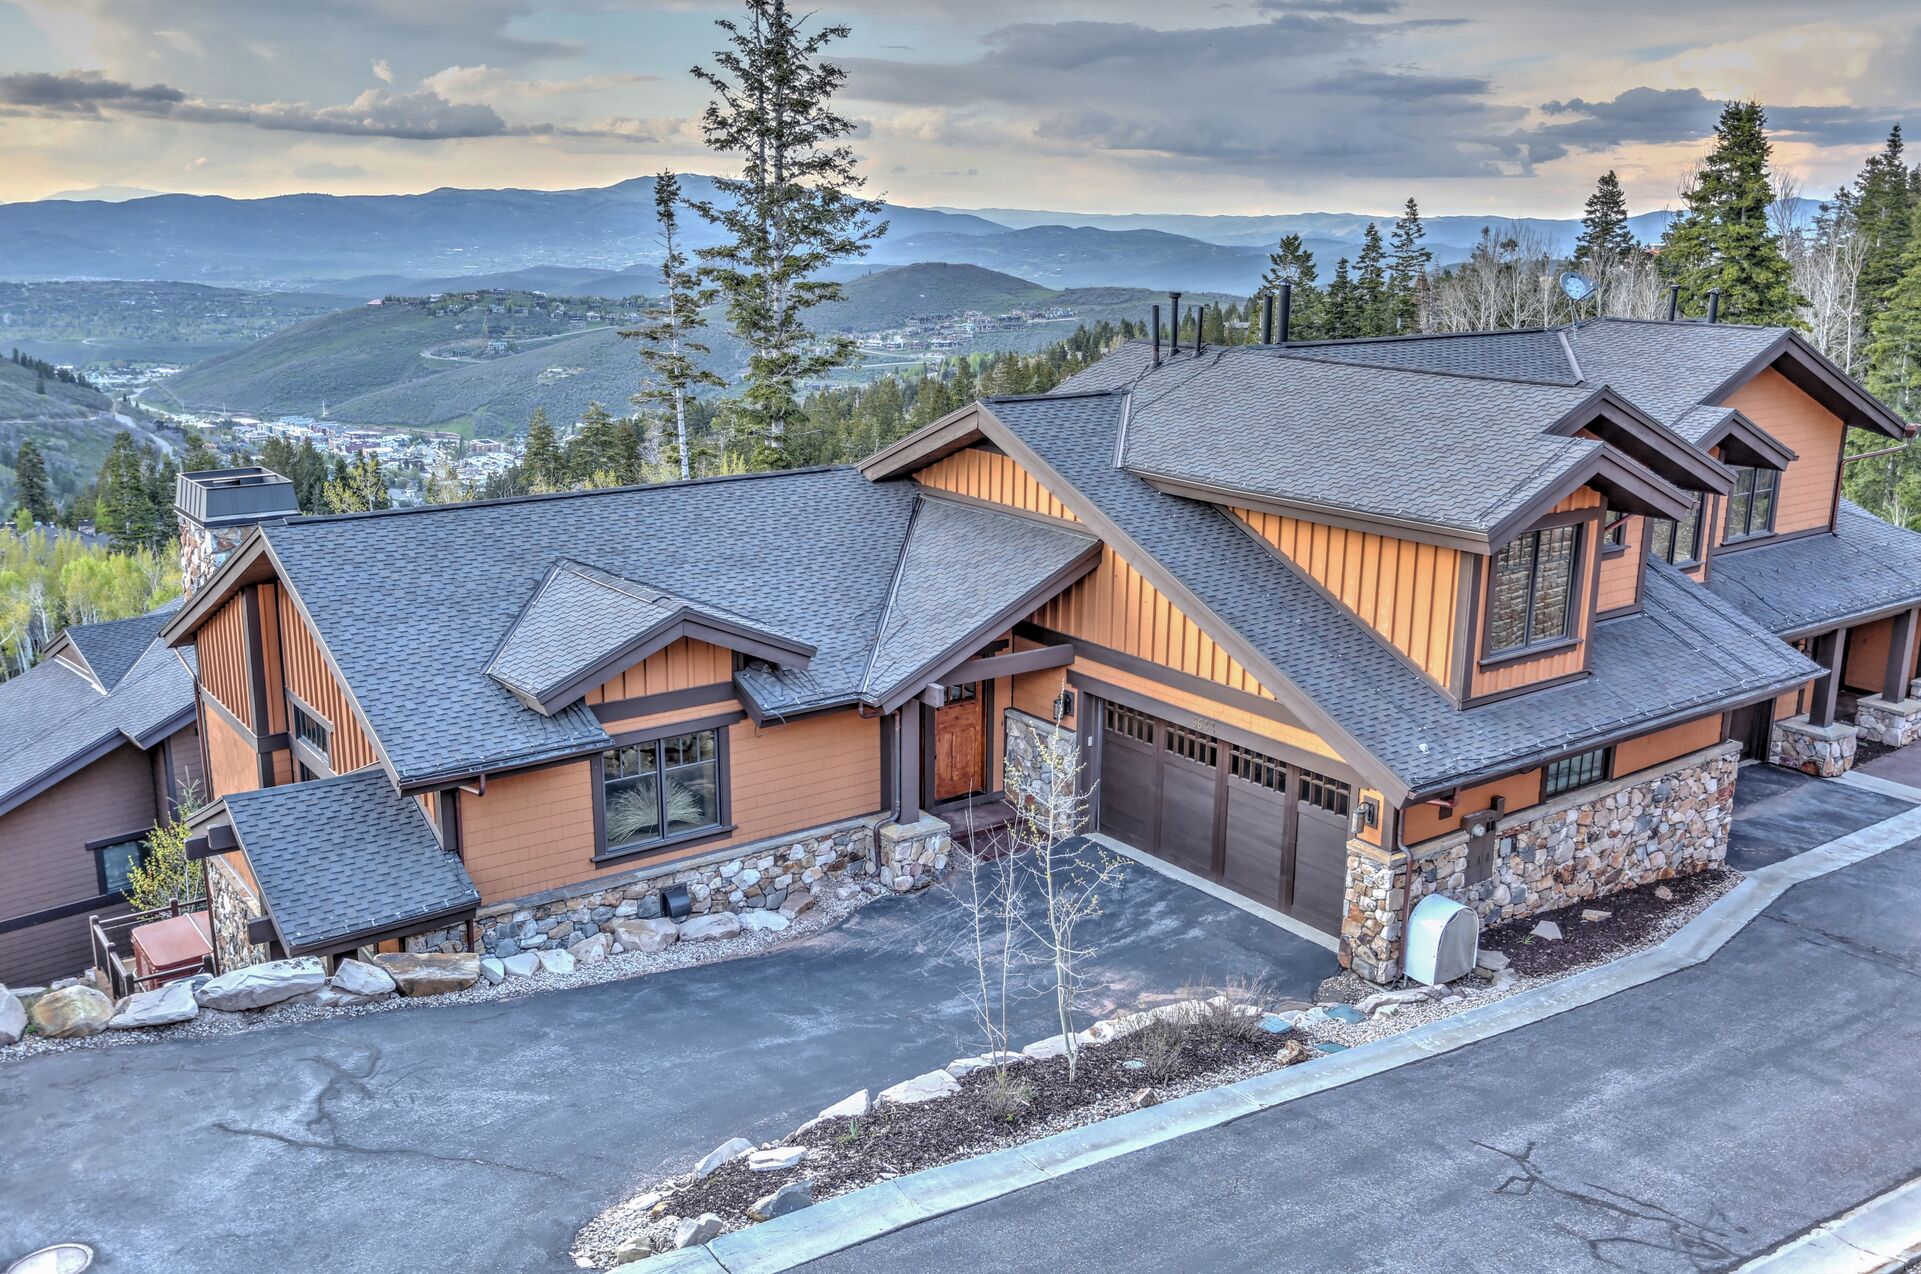 View of Lookout 2 - Deer Valley home facing front of house, overlooking the mountains and ski slopes